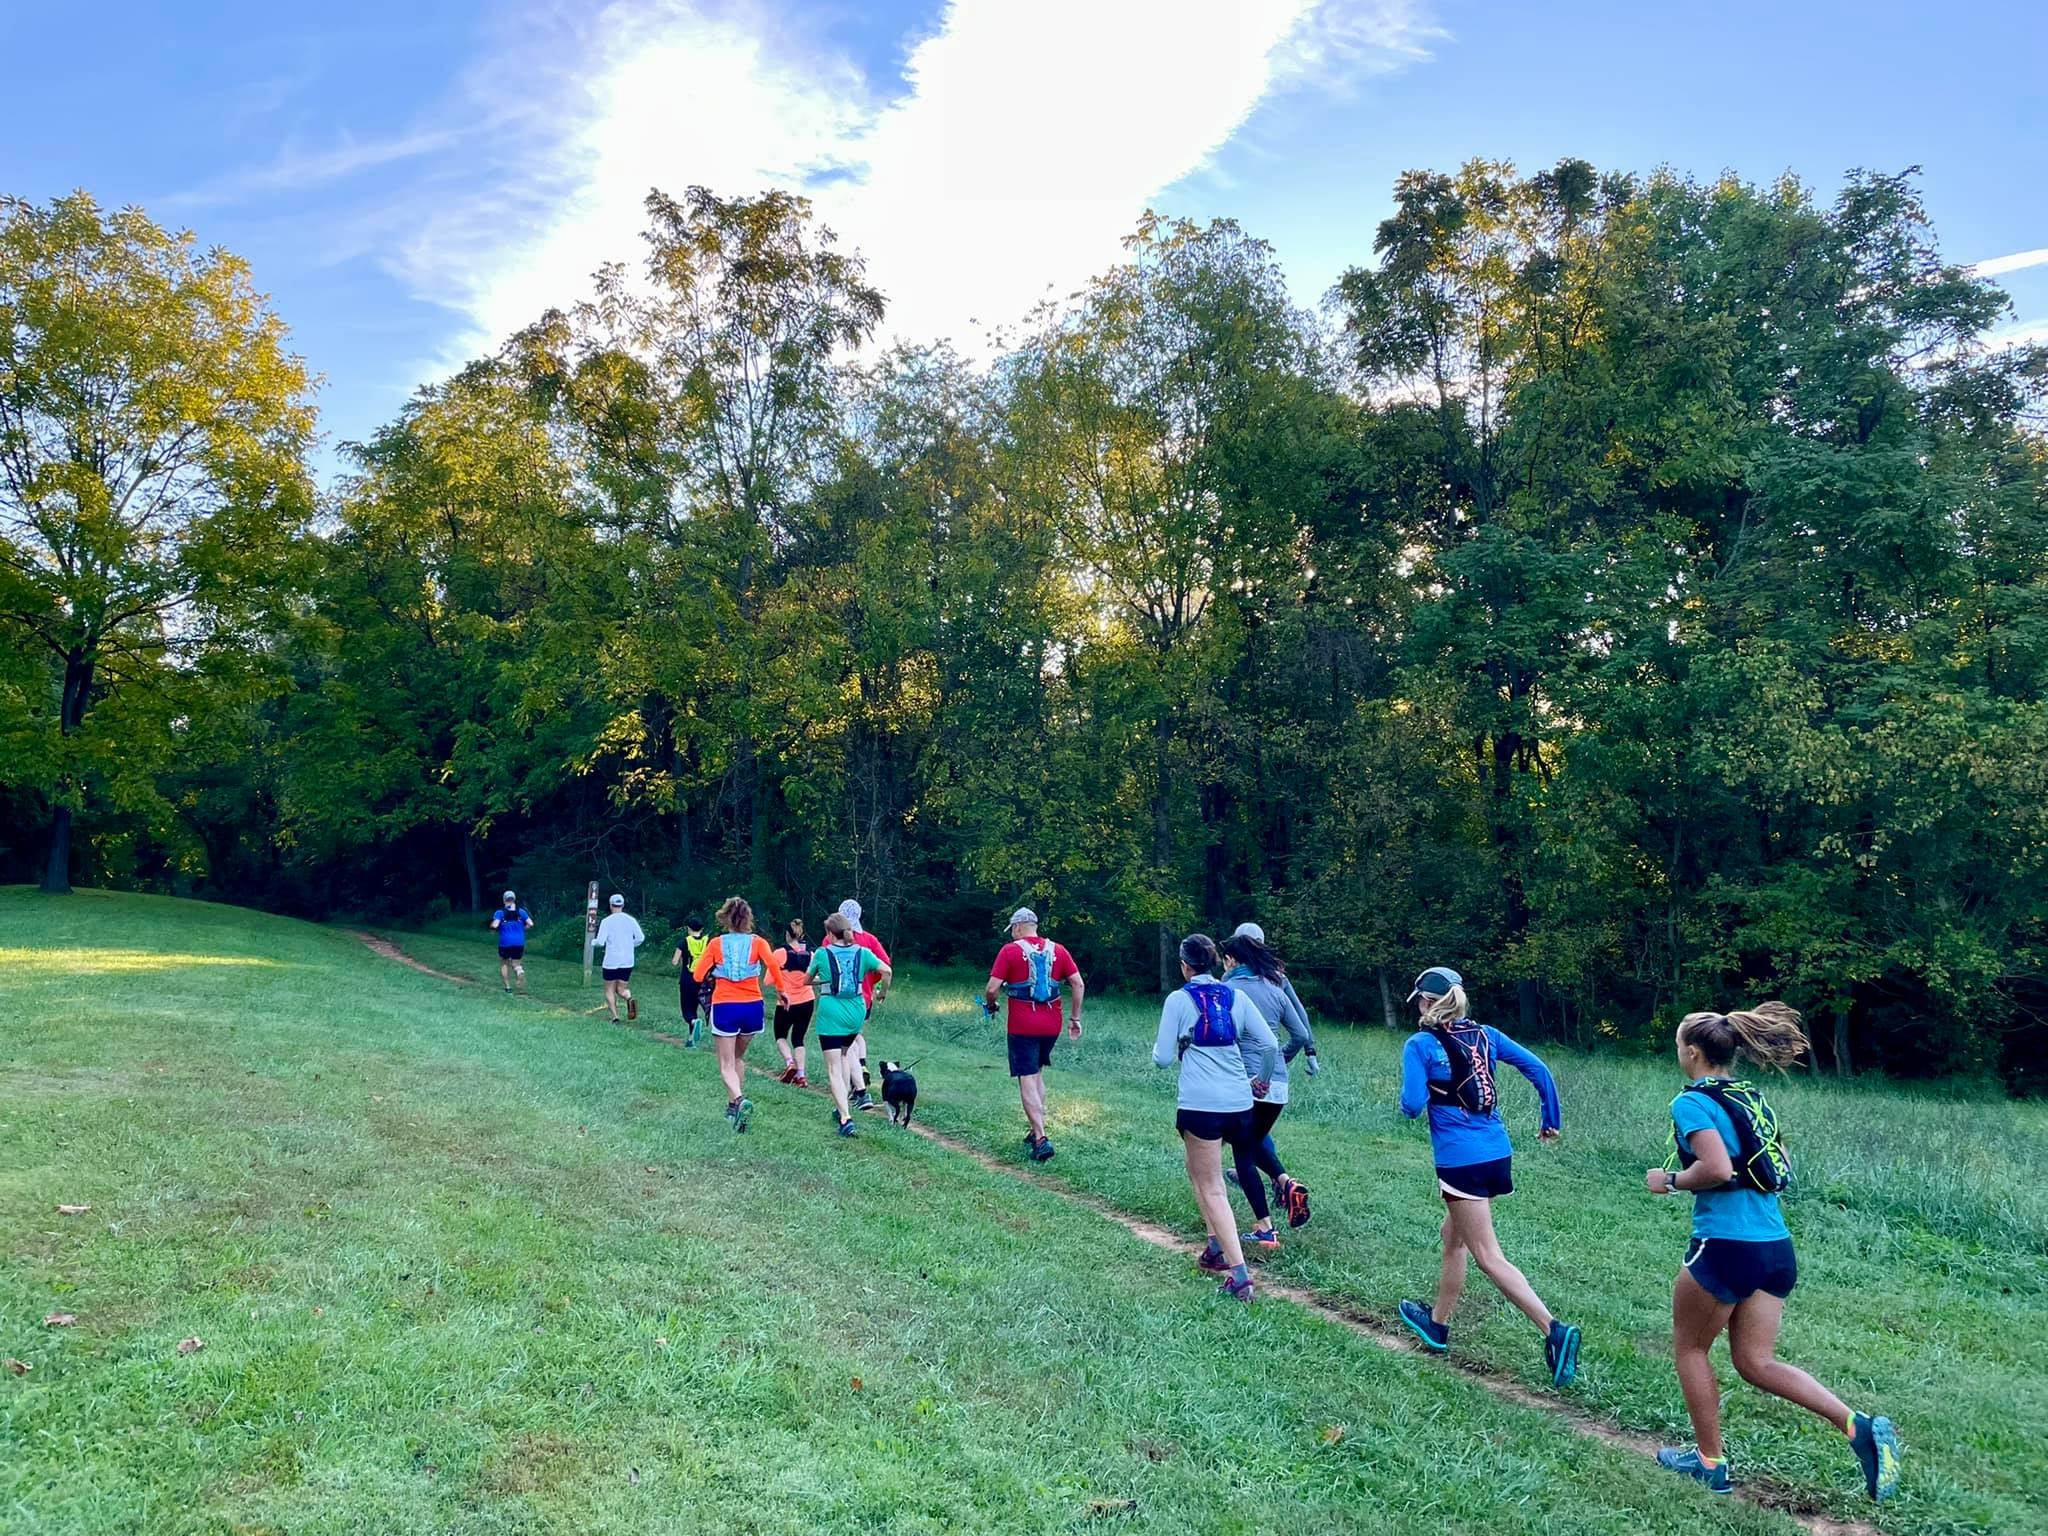 Trail runners running on a trail